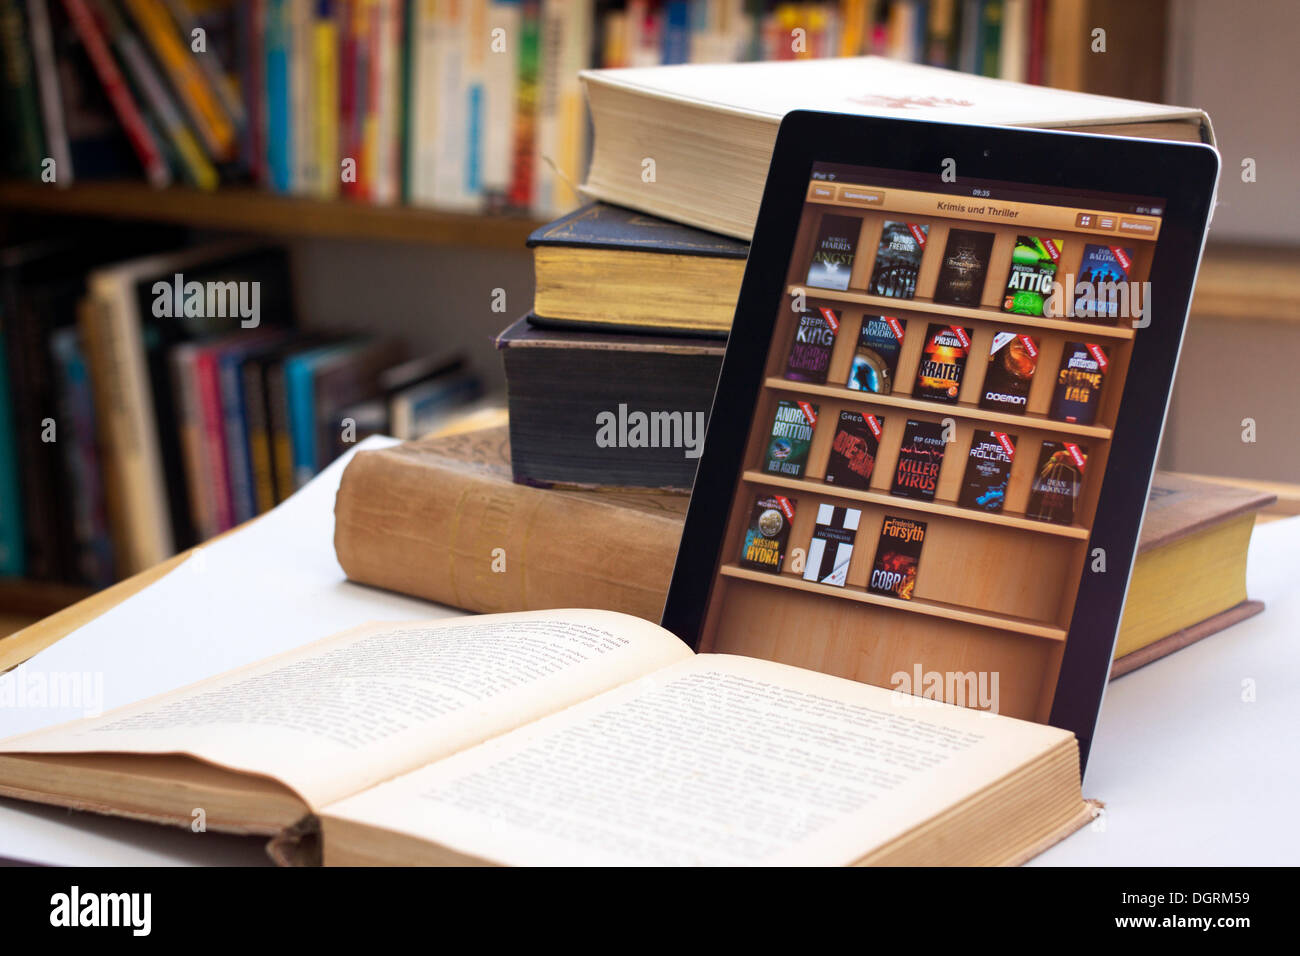 E-book reader beside a stack of old books, Germany Stock Photo